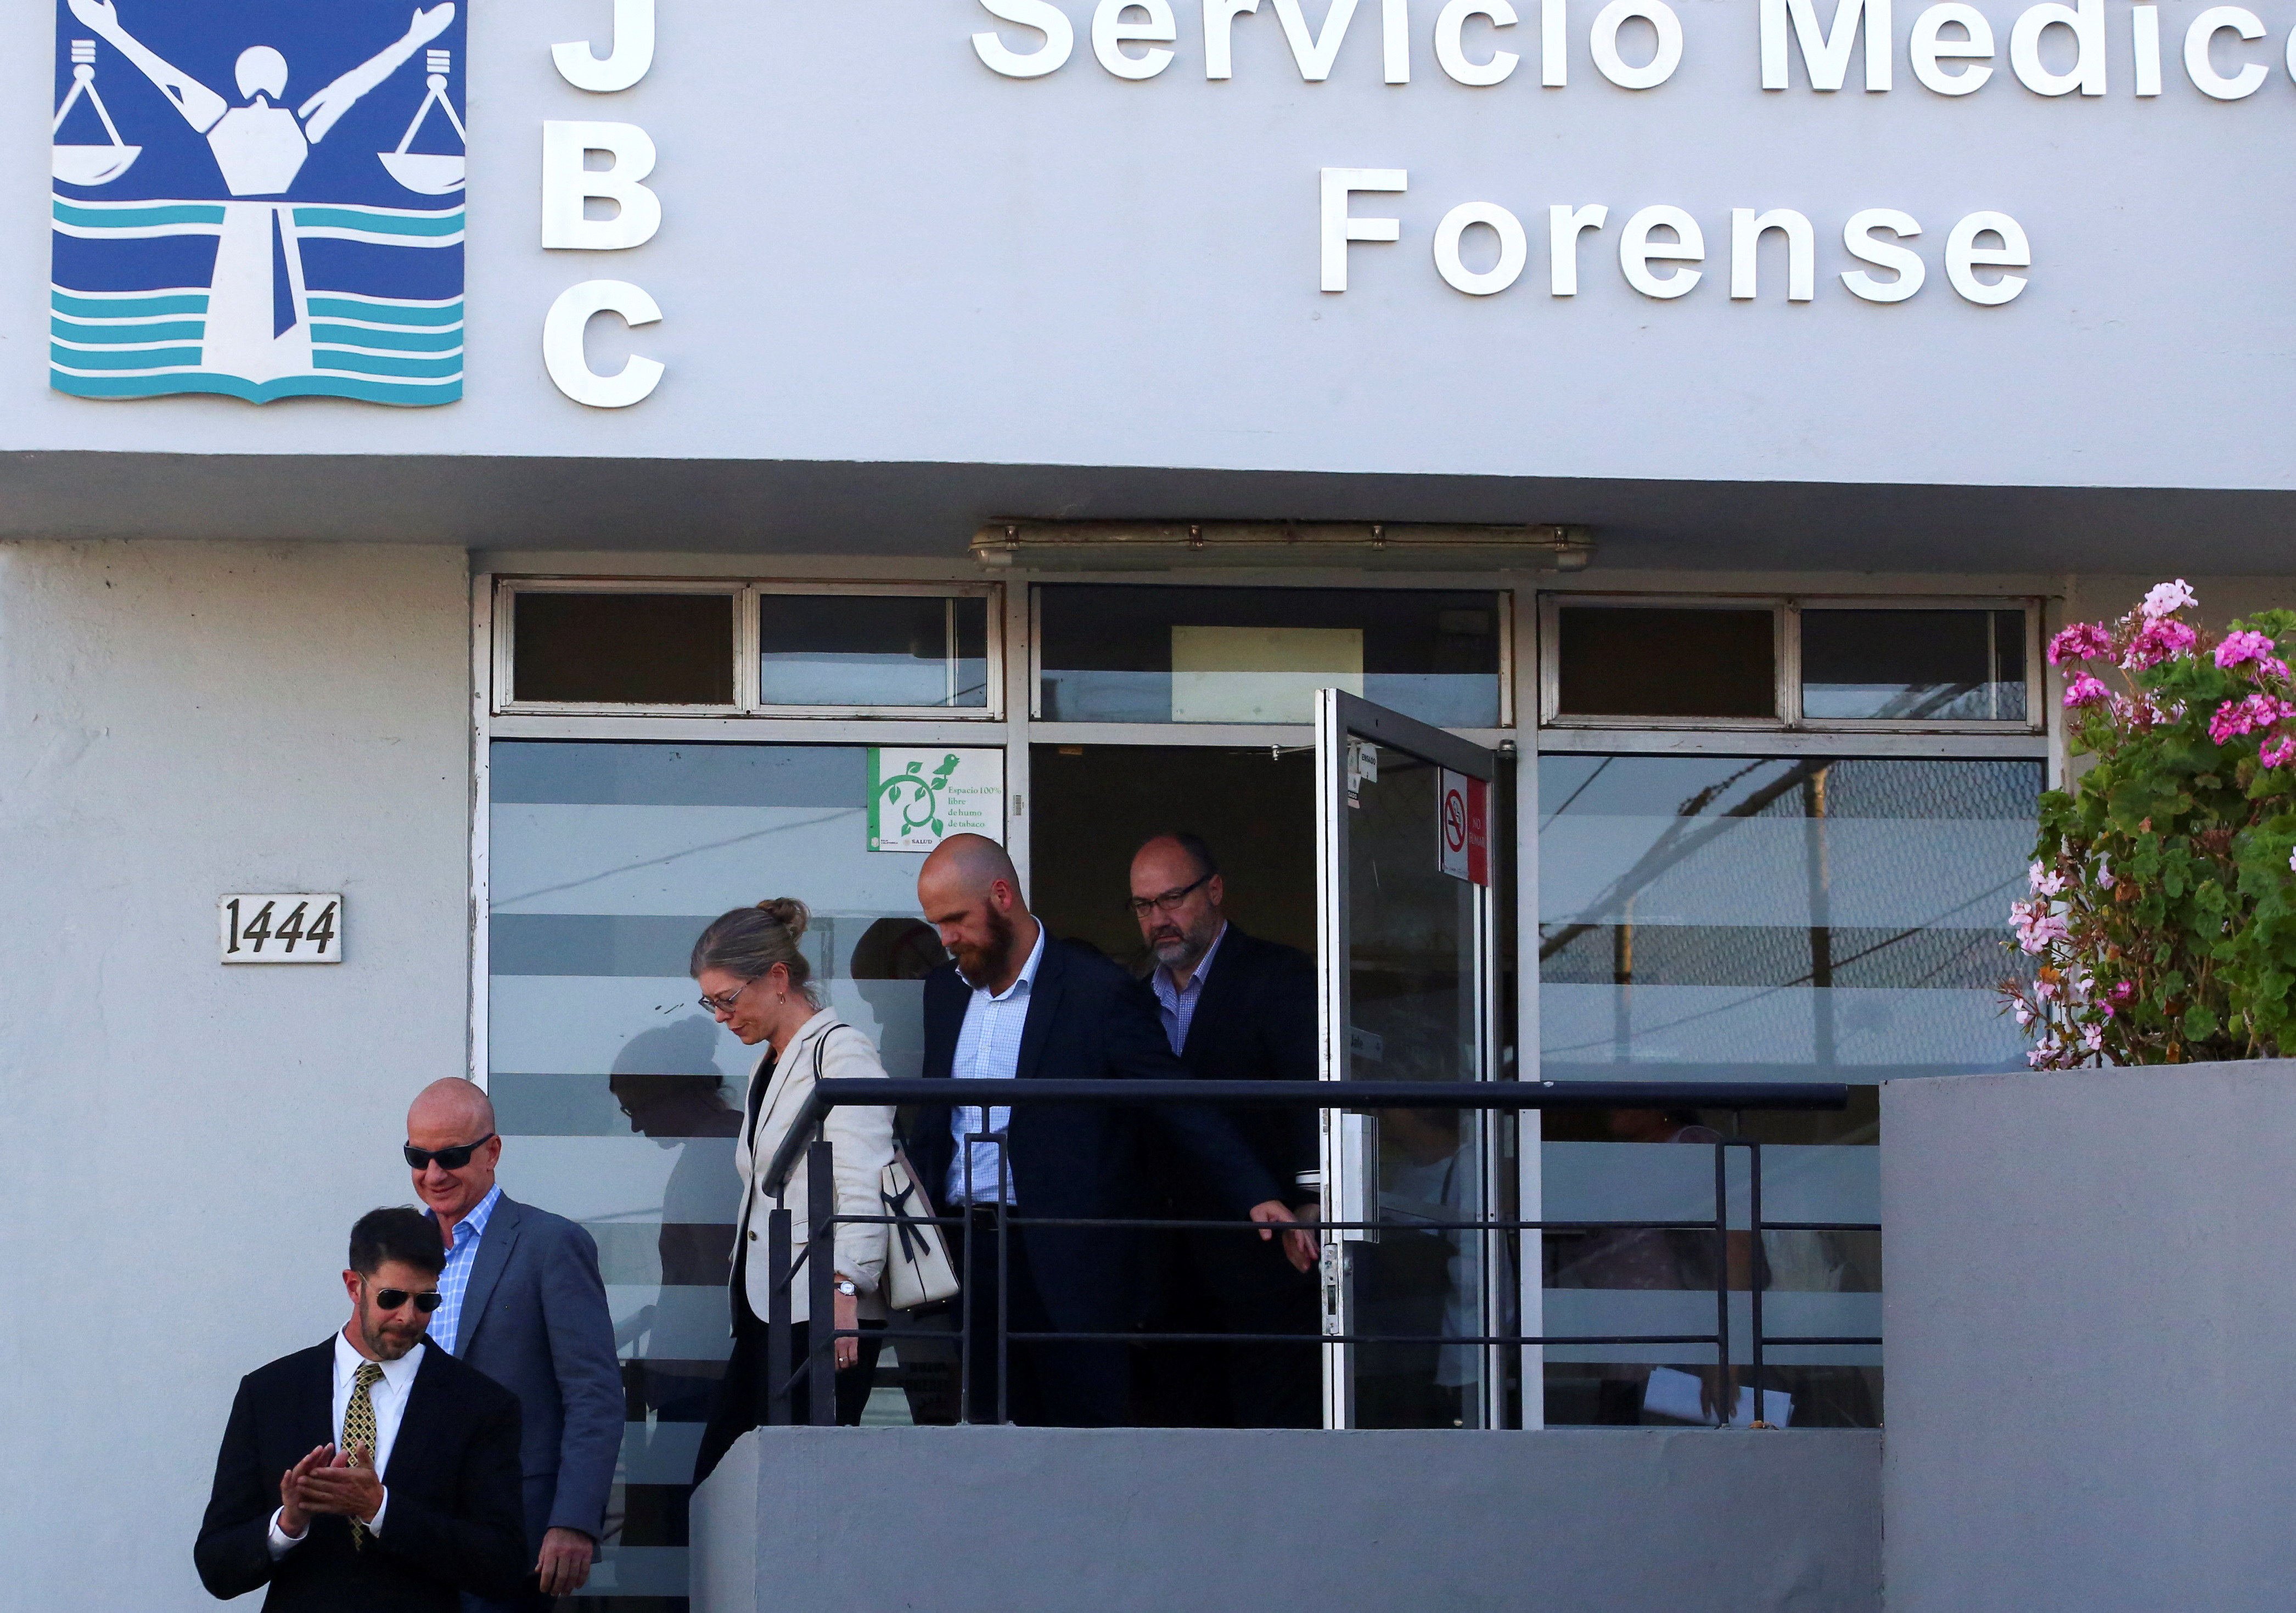 Members of the United States and Australian embassies and the parents of missing U.S. and Australian tourists leave the Forensic Medical Service in Ensenada